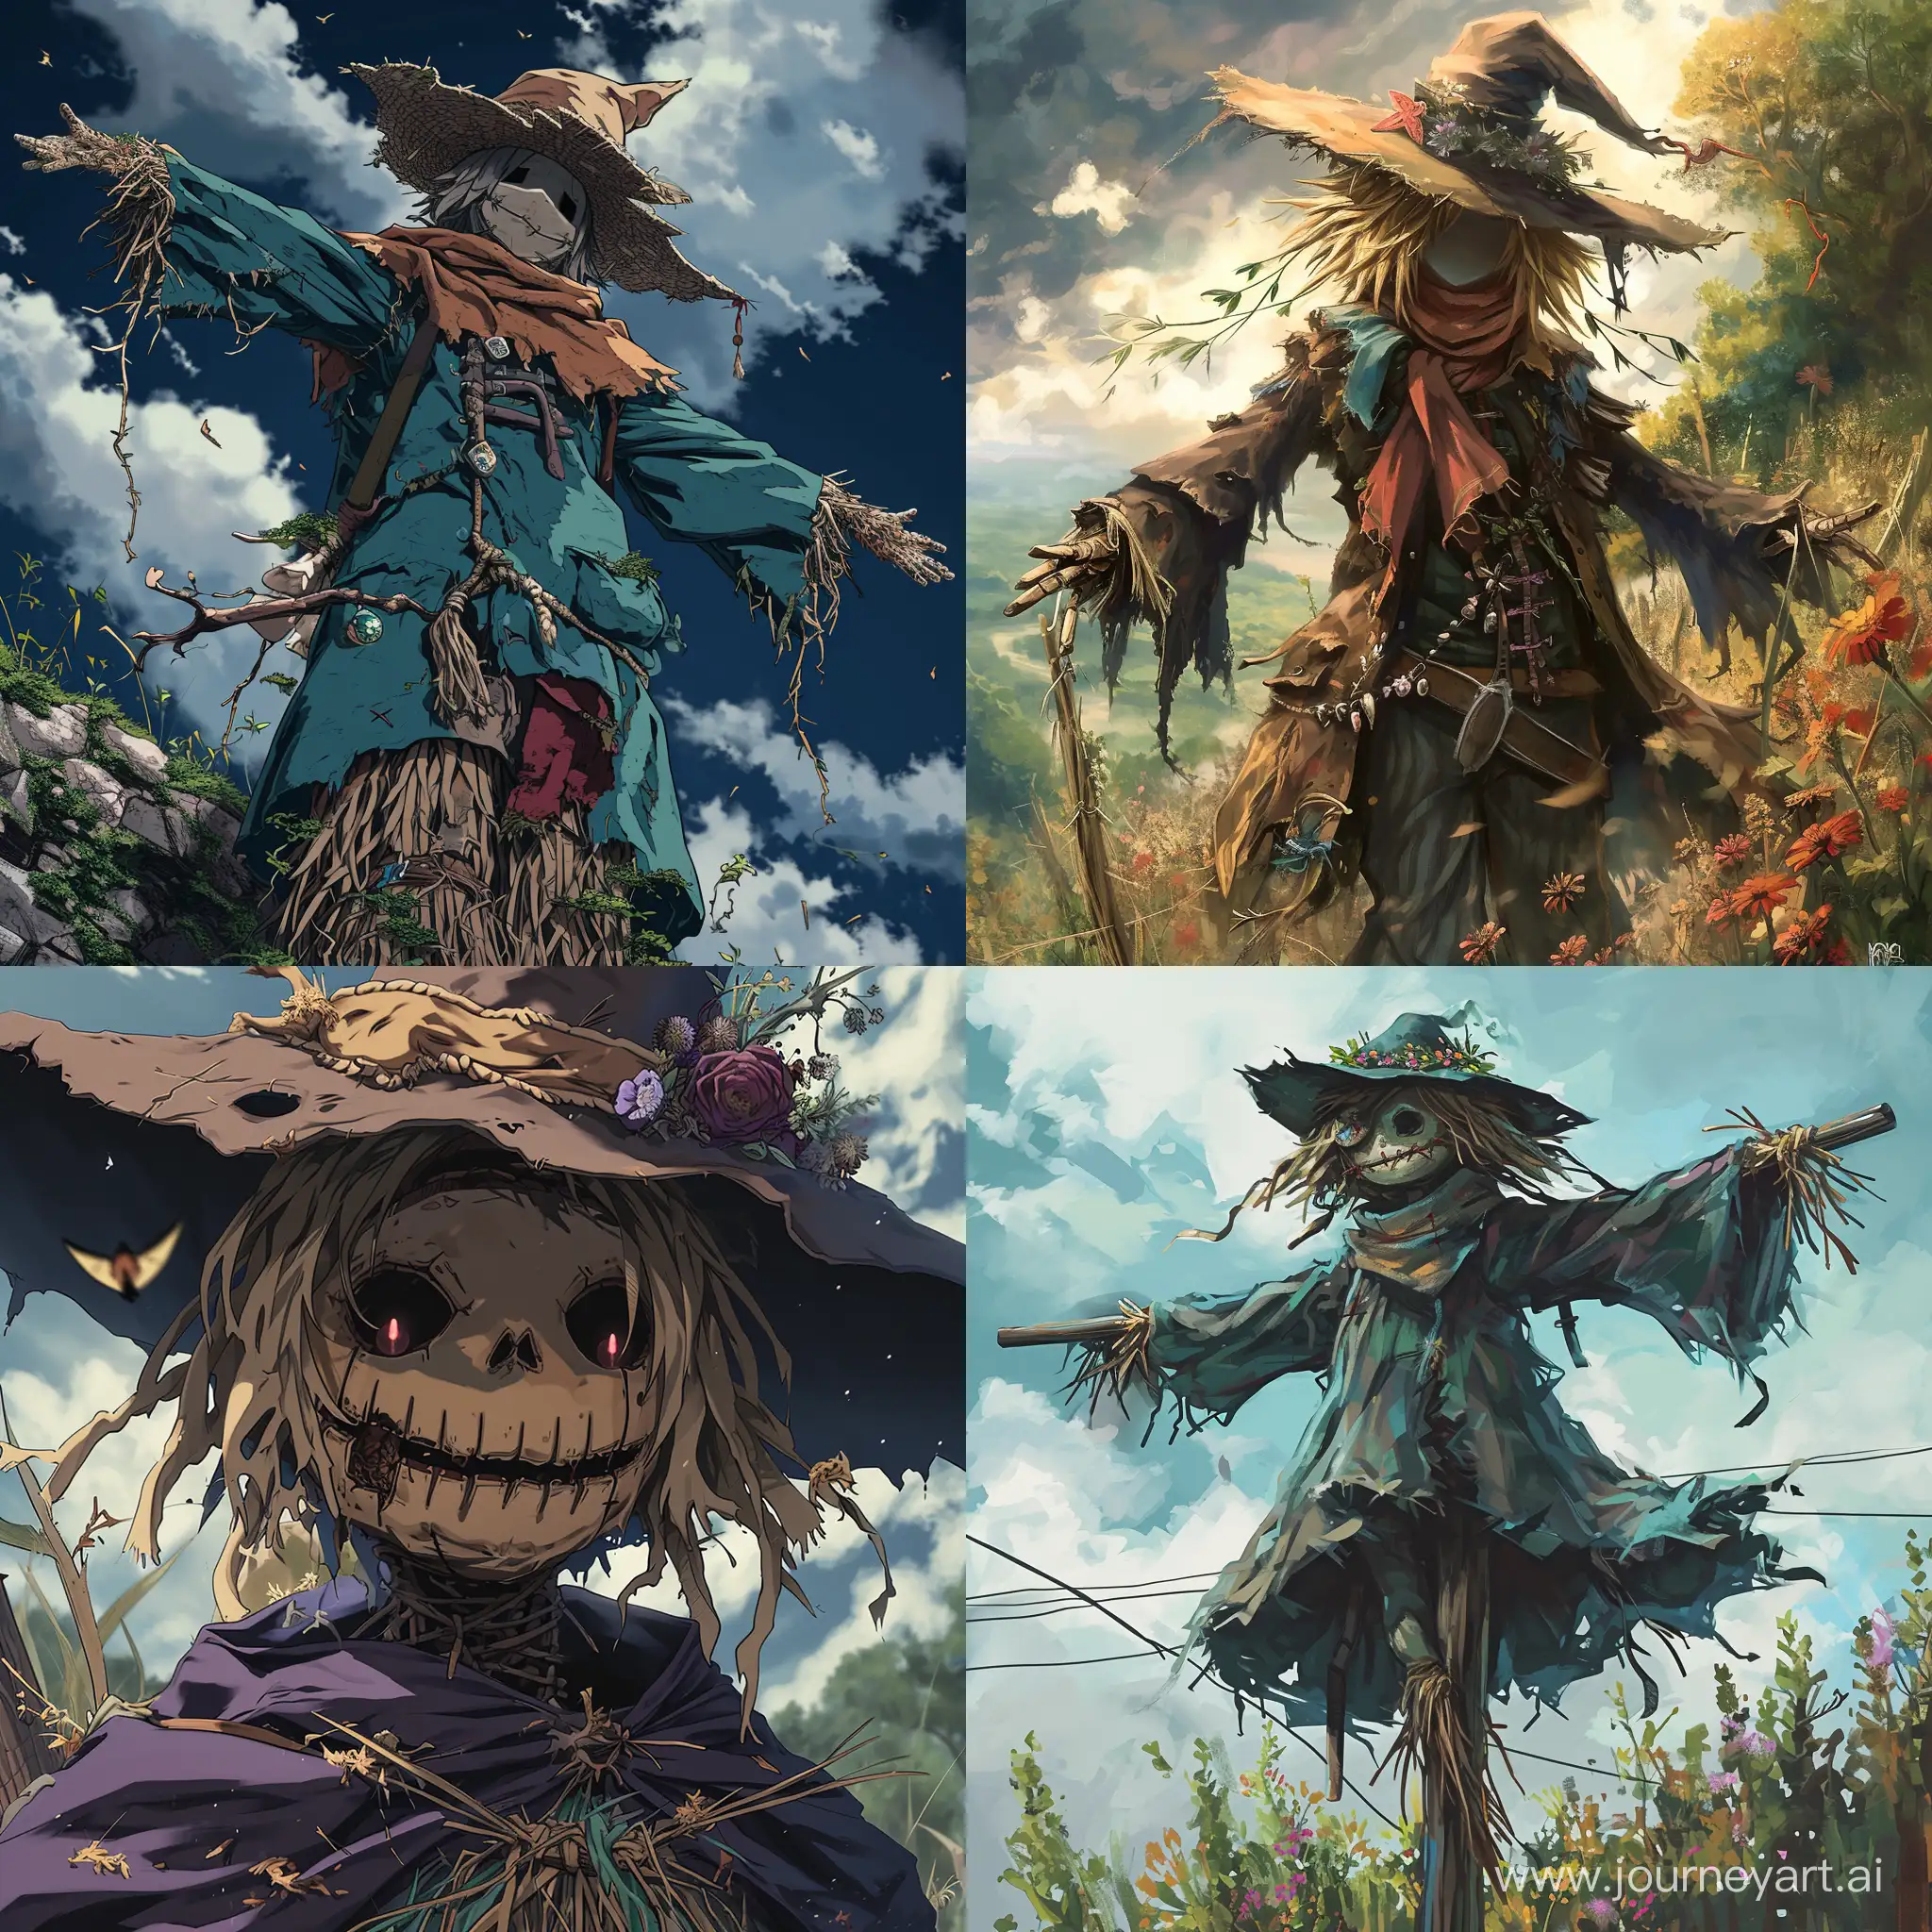 An anime style scarecrow from a fantasy tale.